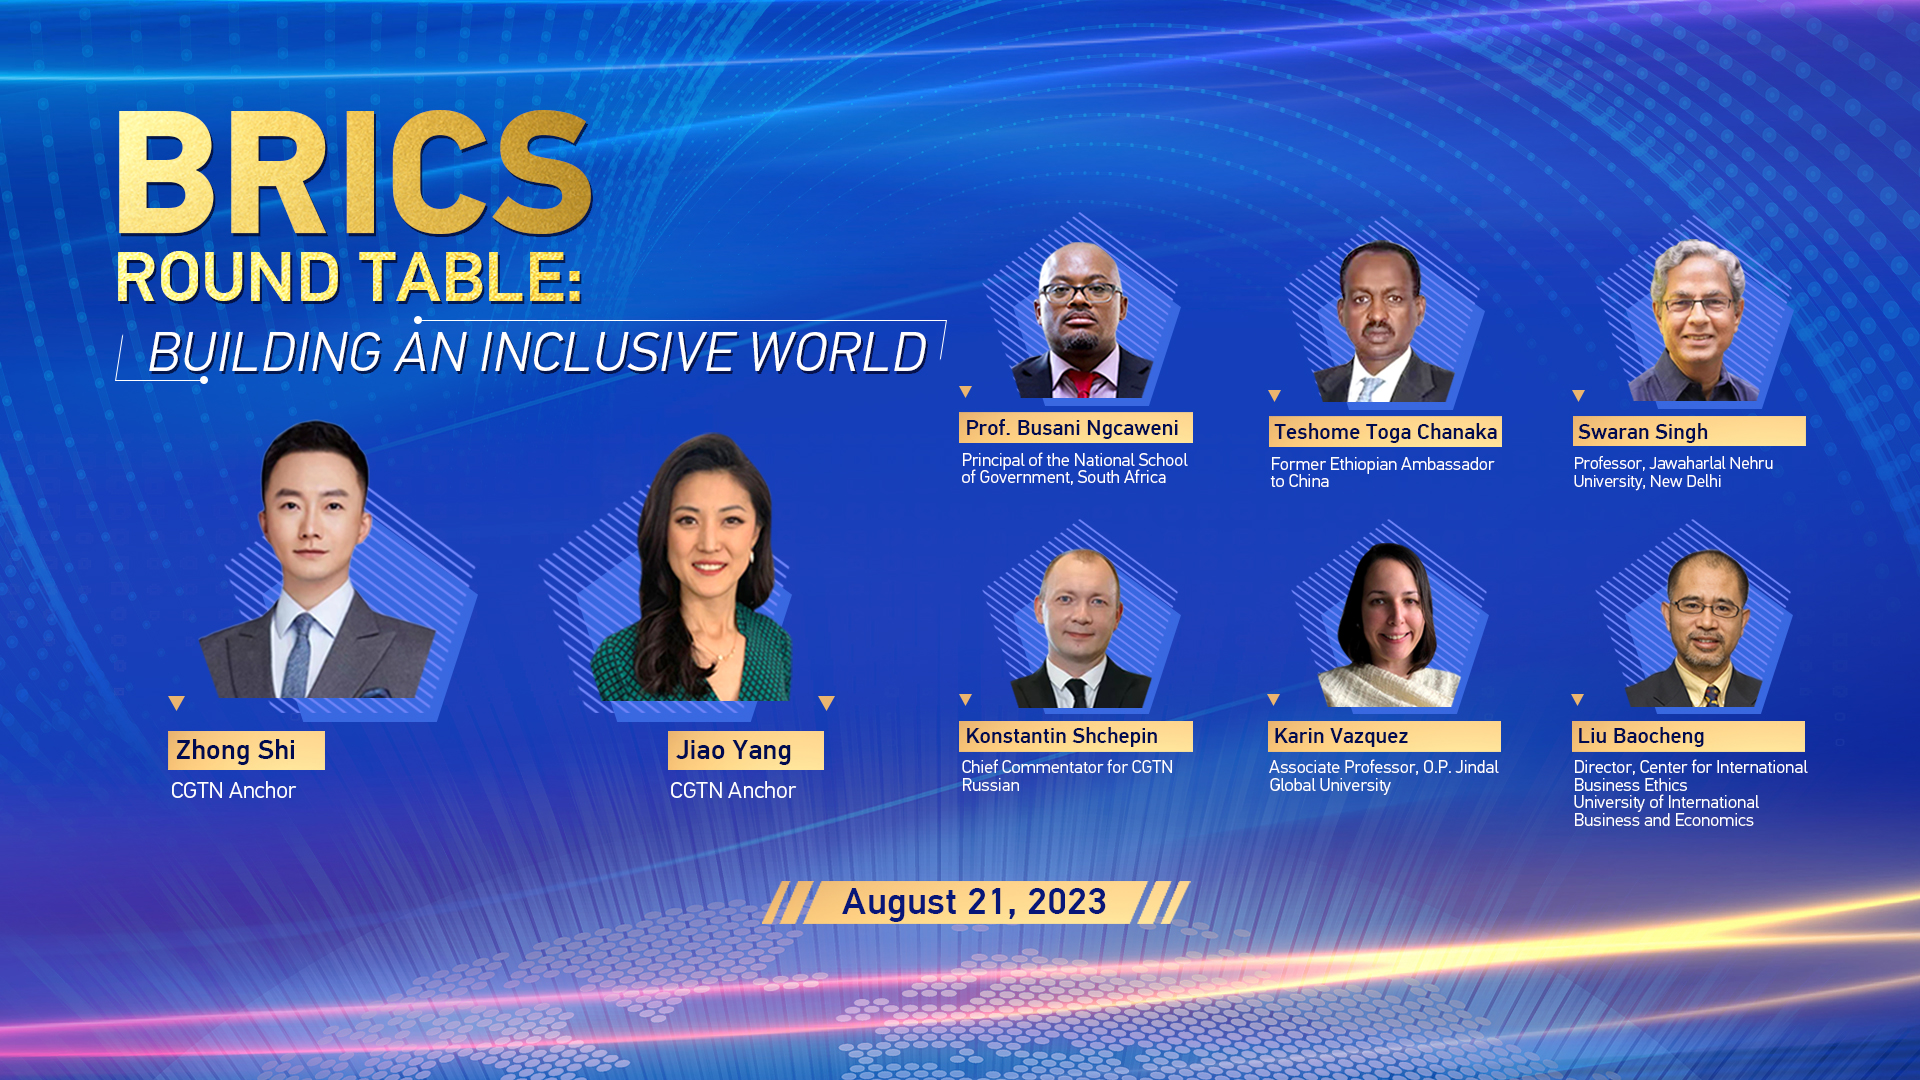 Watch: BRICS Round Table - building an inclusive world